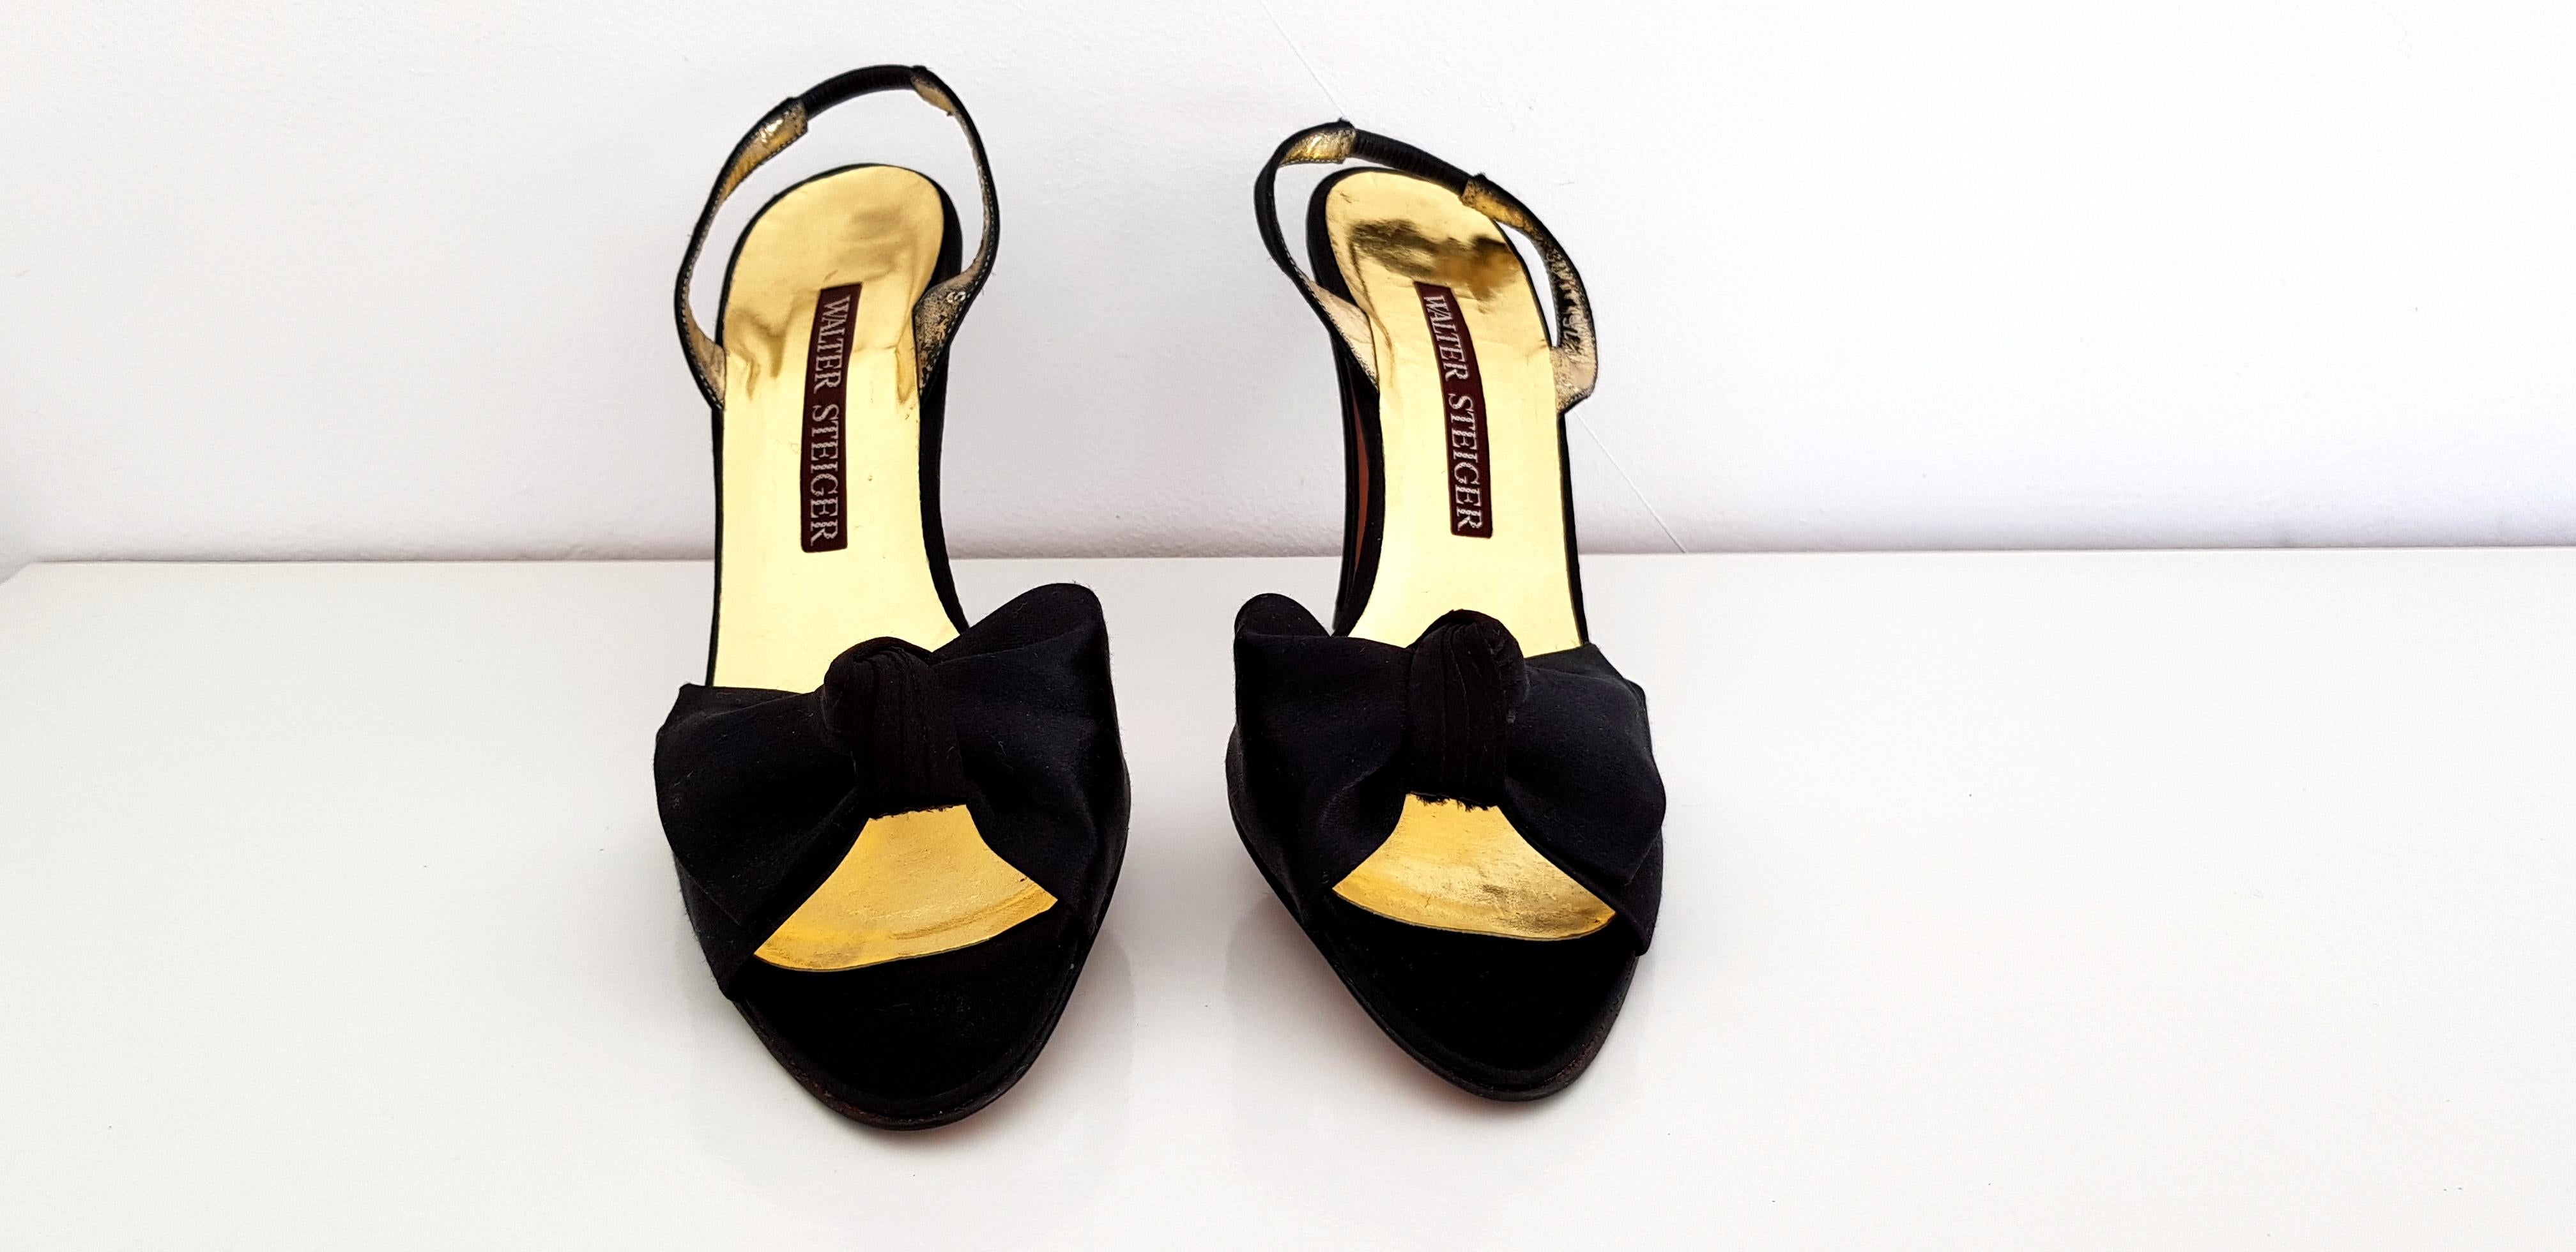 Walter Steiger  Black & Gold Heels
Lace material: Silk
Size: 39
Length: 23 cm
Width: 8.5 cm
Heels height: 10 cm
Never worn, NEW.
Made in Italy